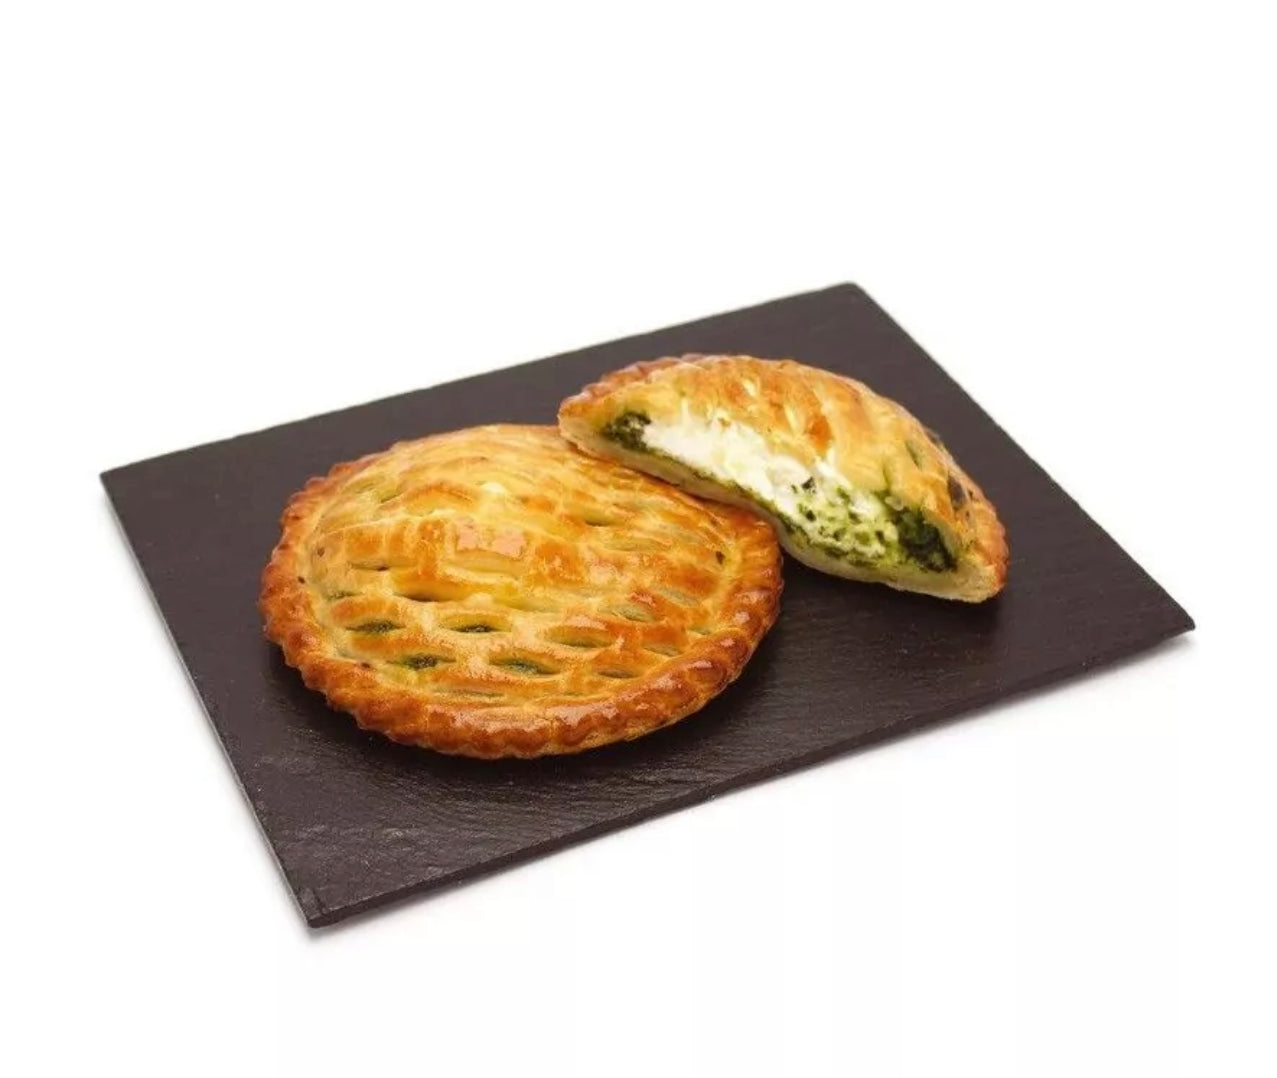 Goat spinach puff pastry 2x120g